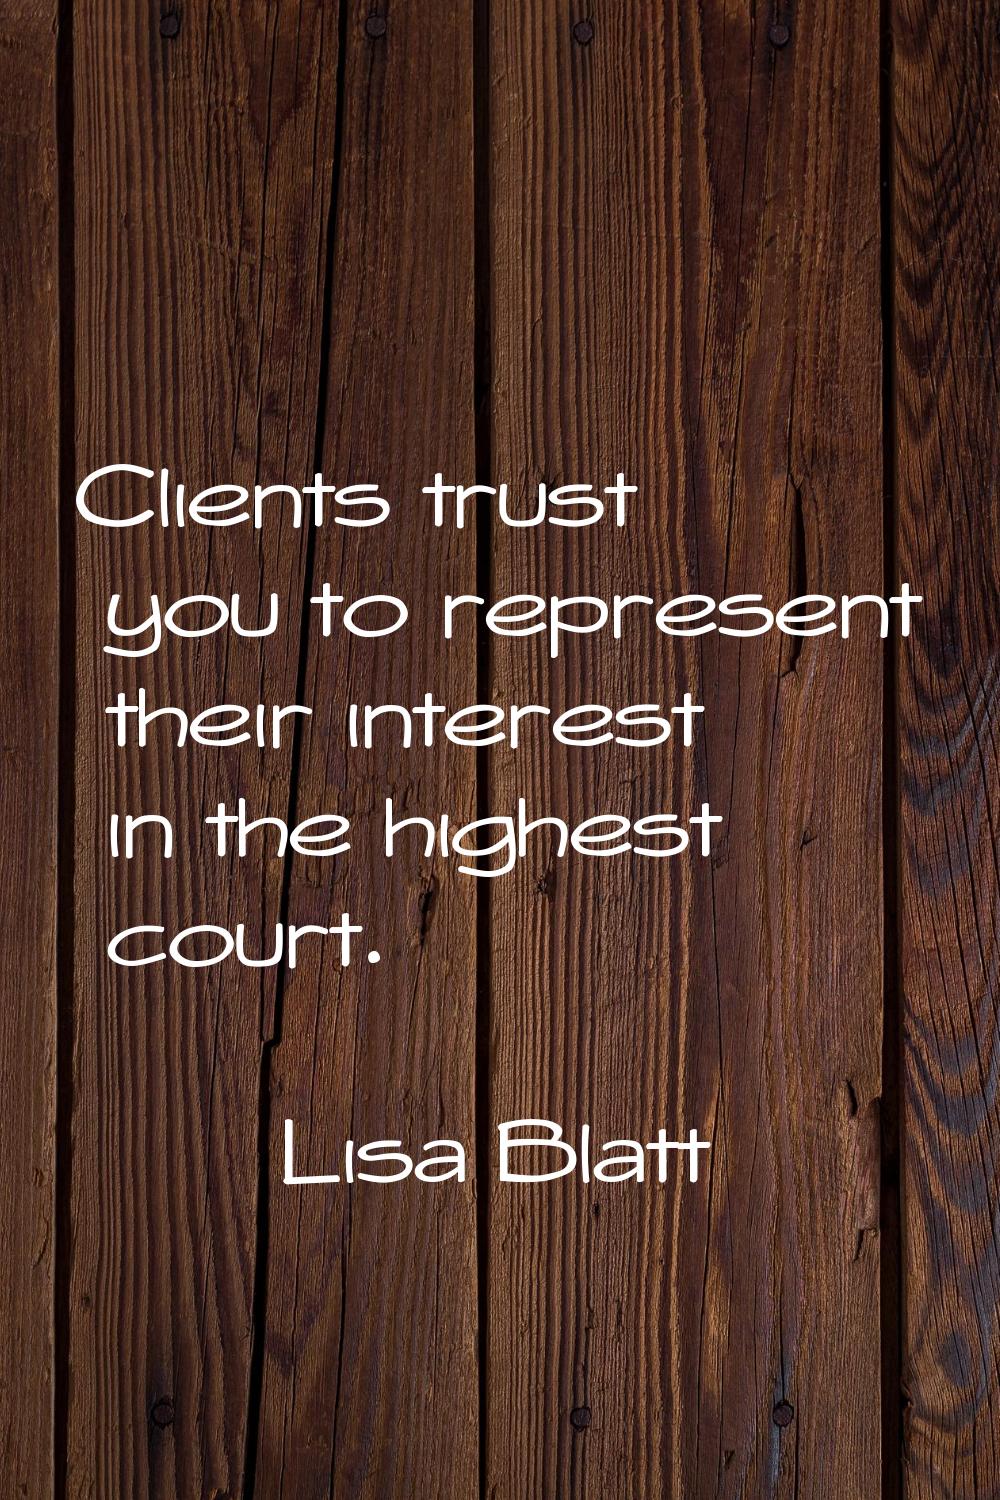 Clients trust you to represent their interest in the highest court.